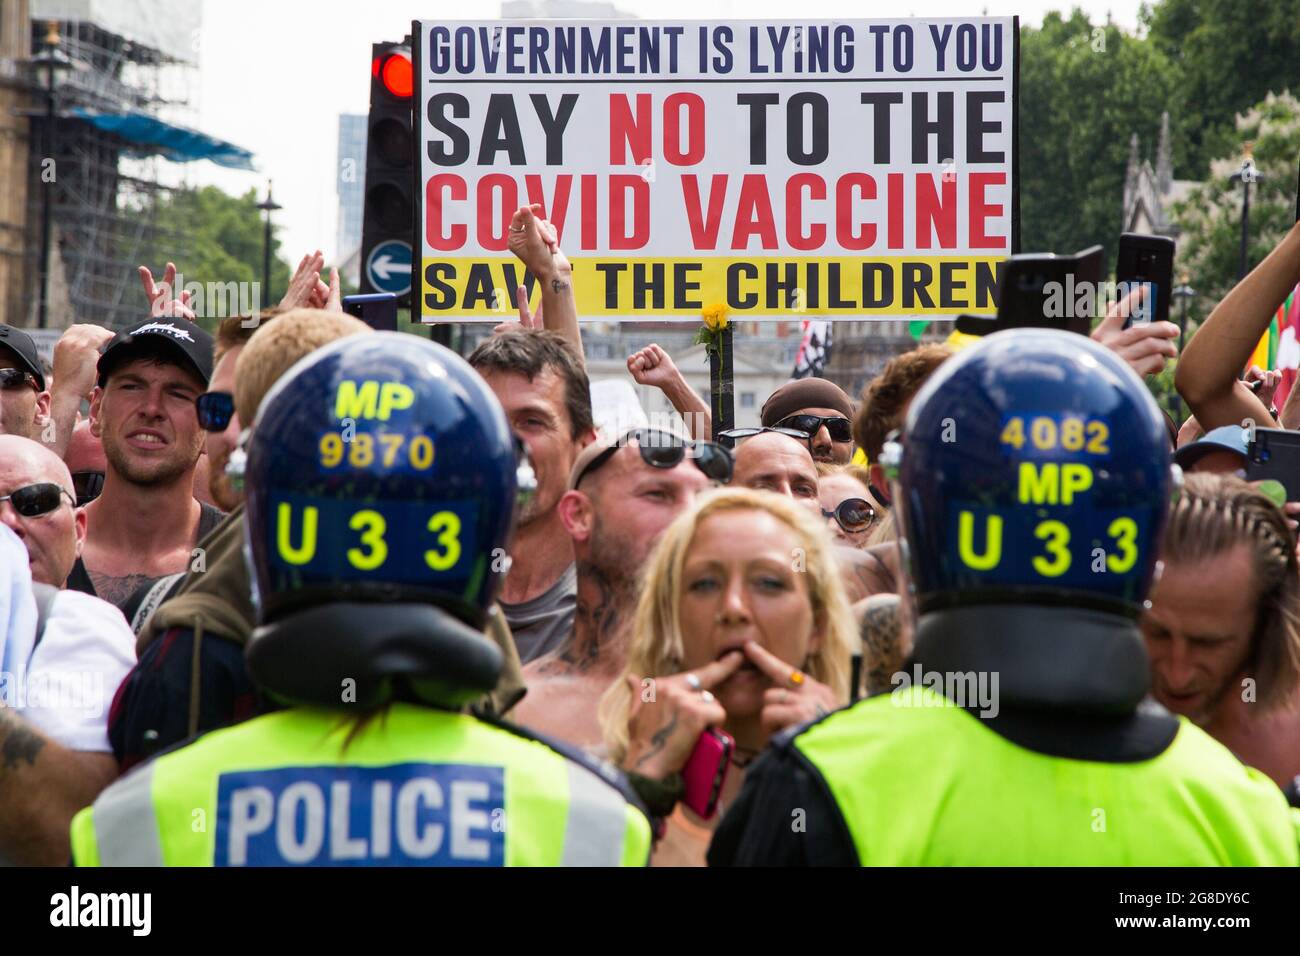 London, UK. 19th July, 2021. Police in riot gear form a cordon in front of protesters during the protest.Anti-vaccination and anti-Covid restrictions demonstrators march to Parliament Square. They say the coronavirus pandemic is a hoax and protest against the idea of vaccine passports. Credit: SOPA Images Limited/Alamy Live News Stock Photo